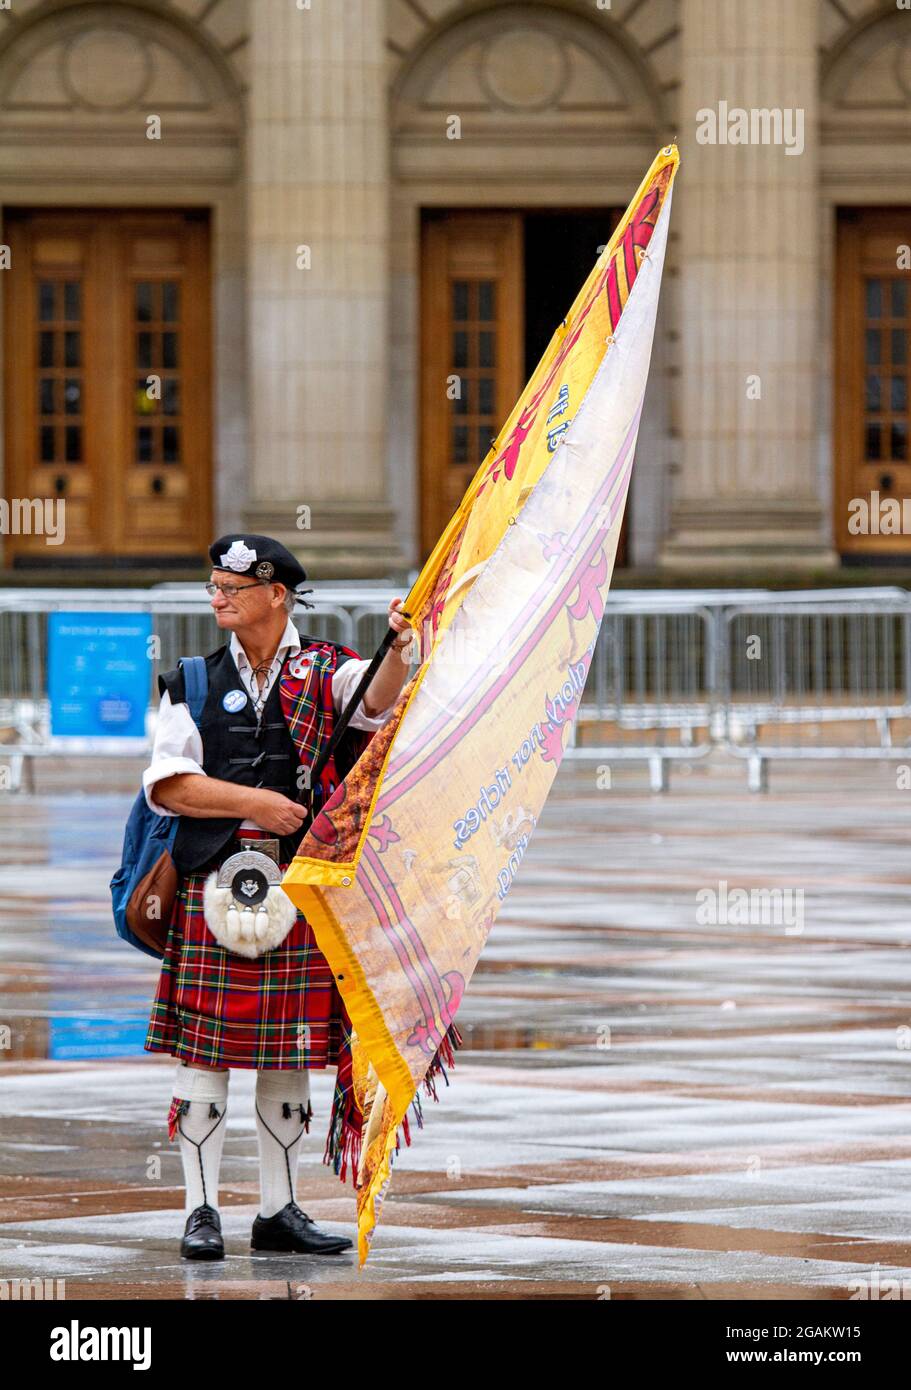 Dundee, Tayside, Scotland, UK. 31st July, 2021. UK Politics: The All Under One Banner static rally in Dundee with Independence Live have gathered in the city centre. Today sees the biggest static rally in support of independence that Dundee has seen since the outbreak of Covid-19, with All Under One Banner declaring that the rally is set to go ahead as planned. Credit: Dundee Photographics/Alamy Live News Stock Photo